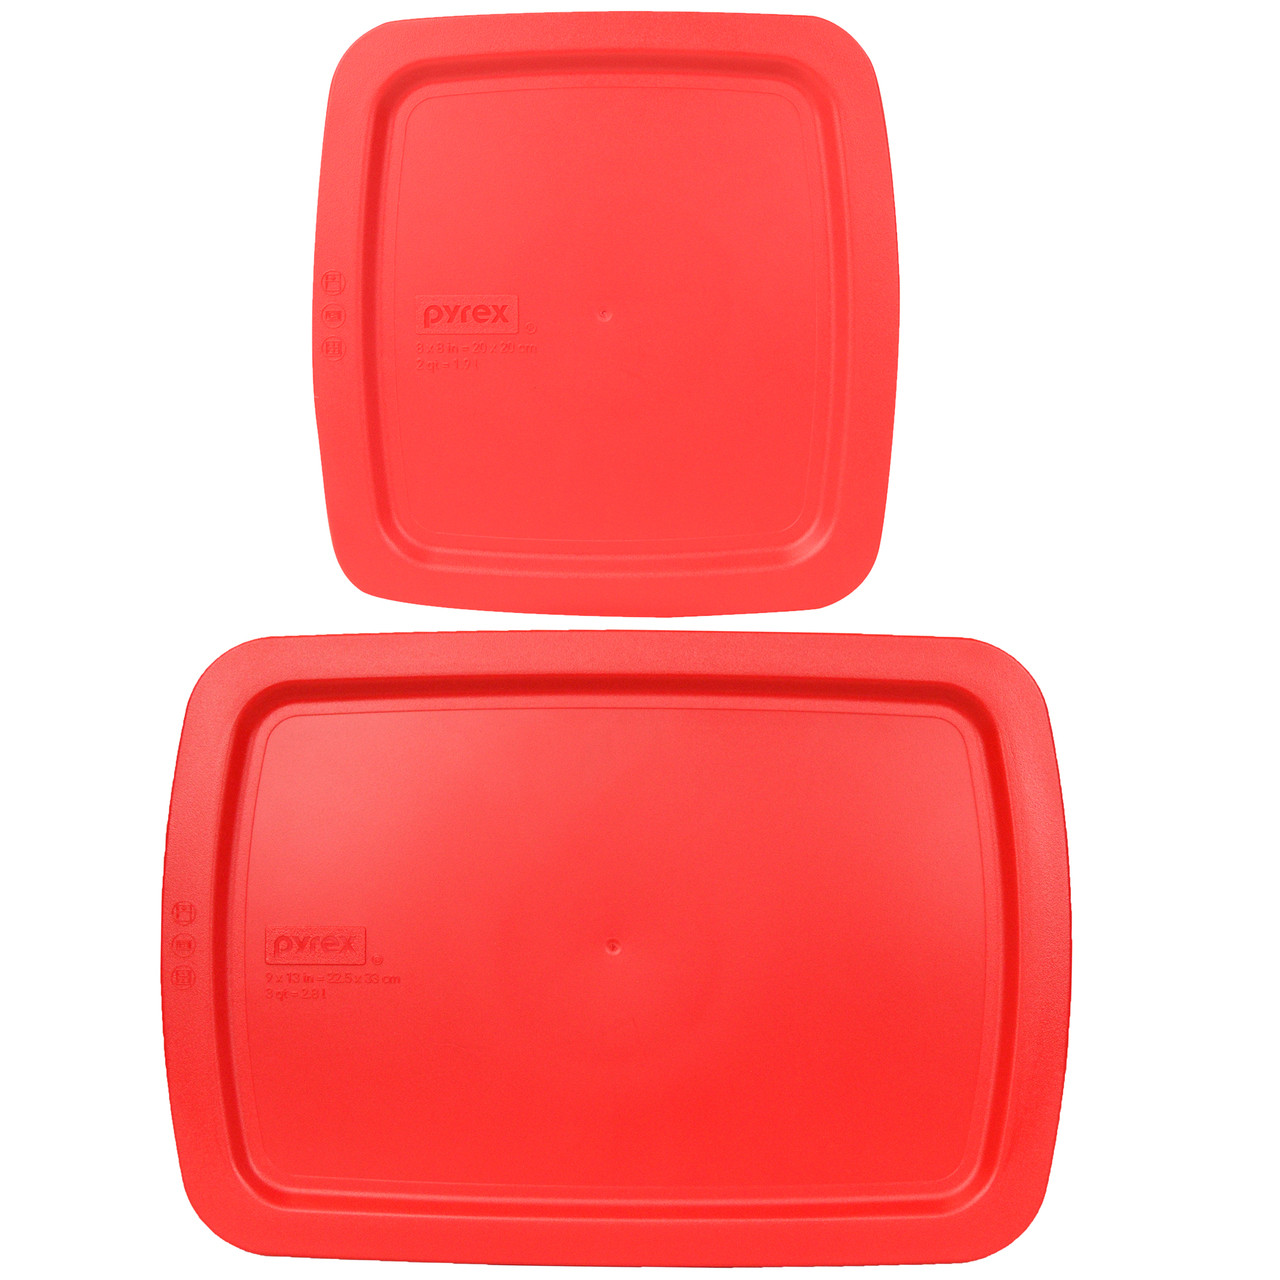 Pyrex 222 Square Glass Baking Dish w/ 222-PC Red Plastic Lid Cover 